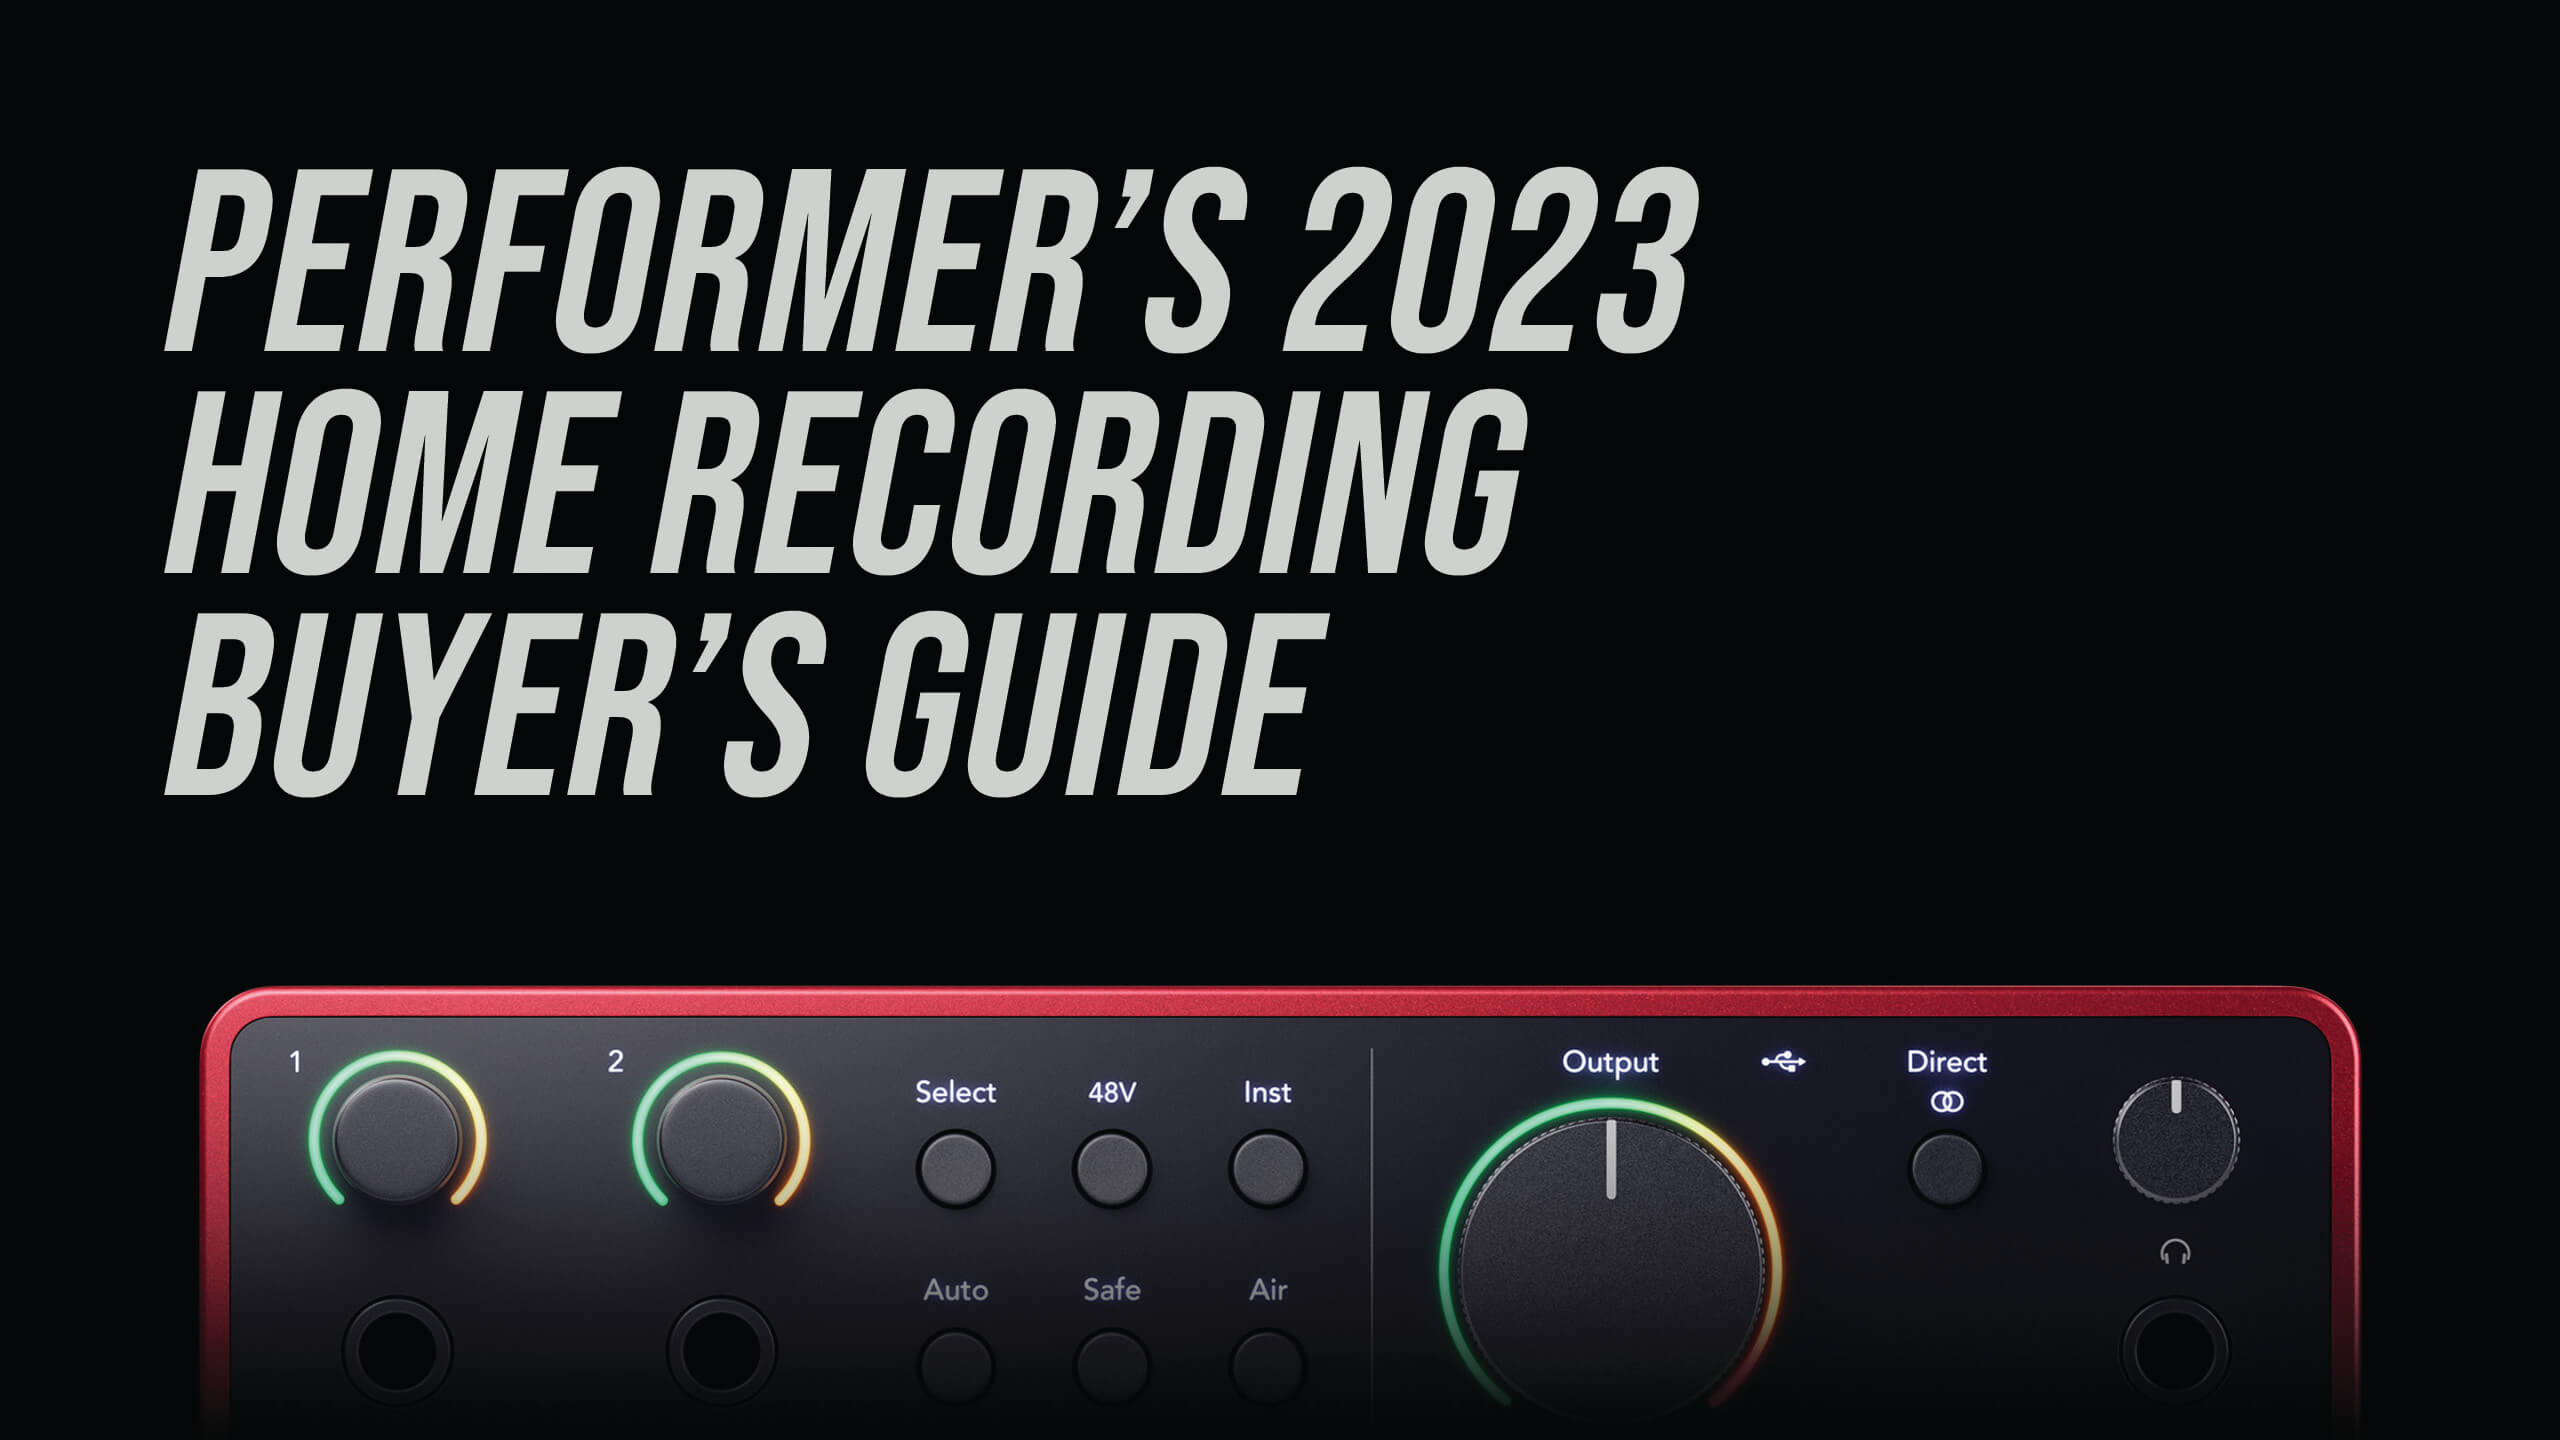 PERFORMER’S 2023 HOME RECORDING BUYER’S GUIDE